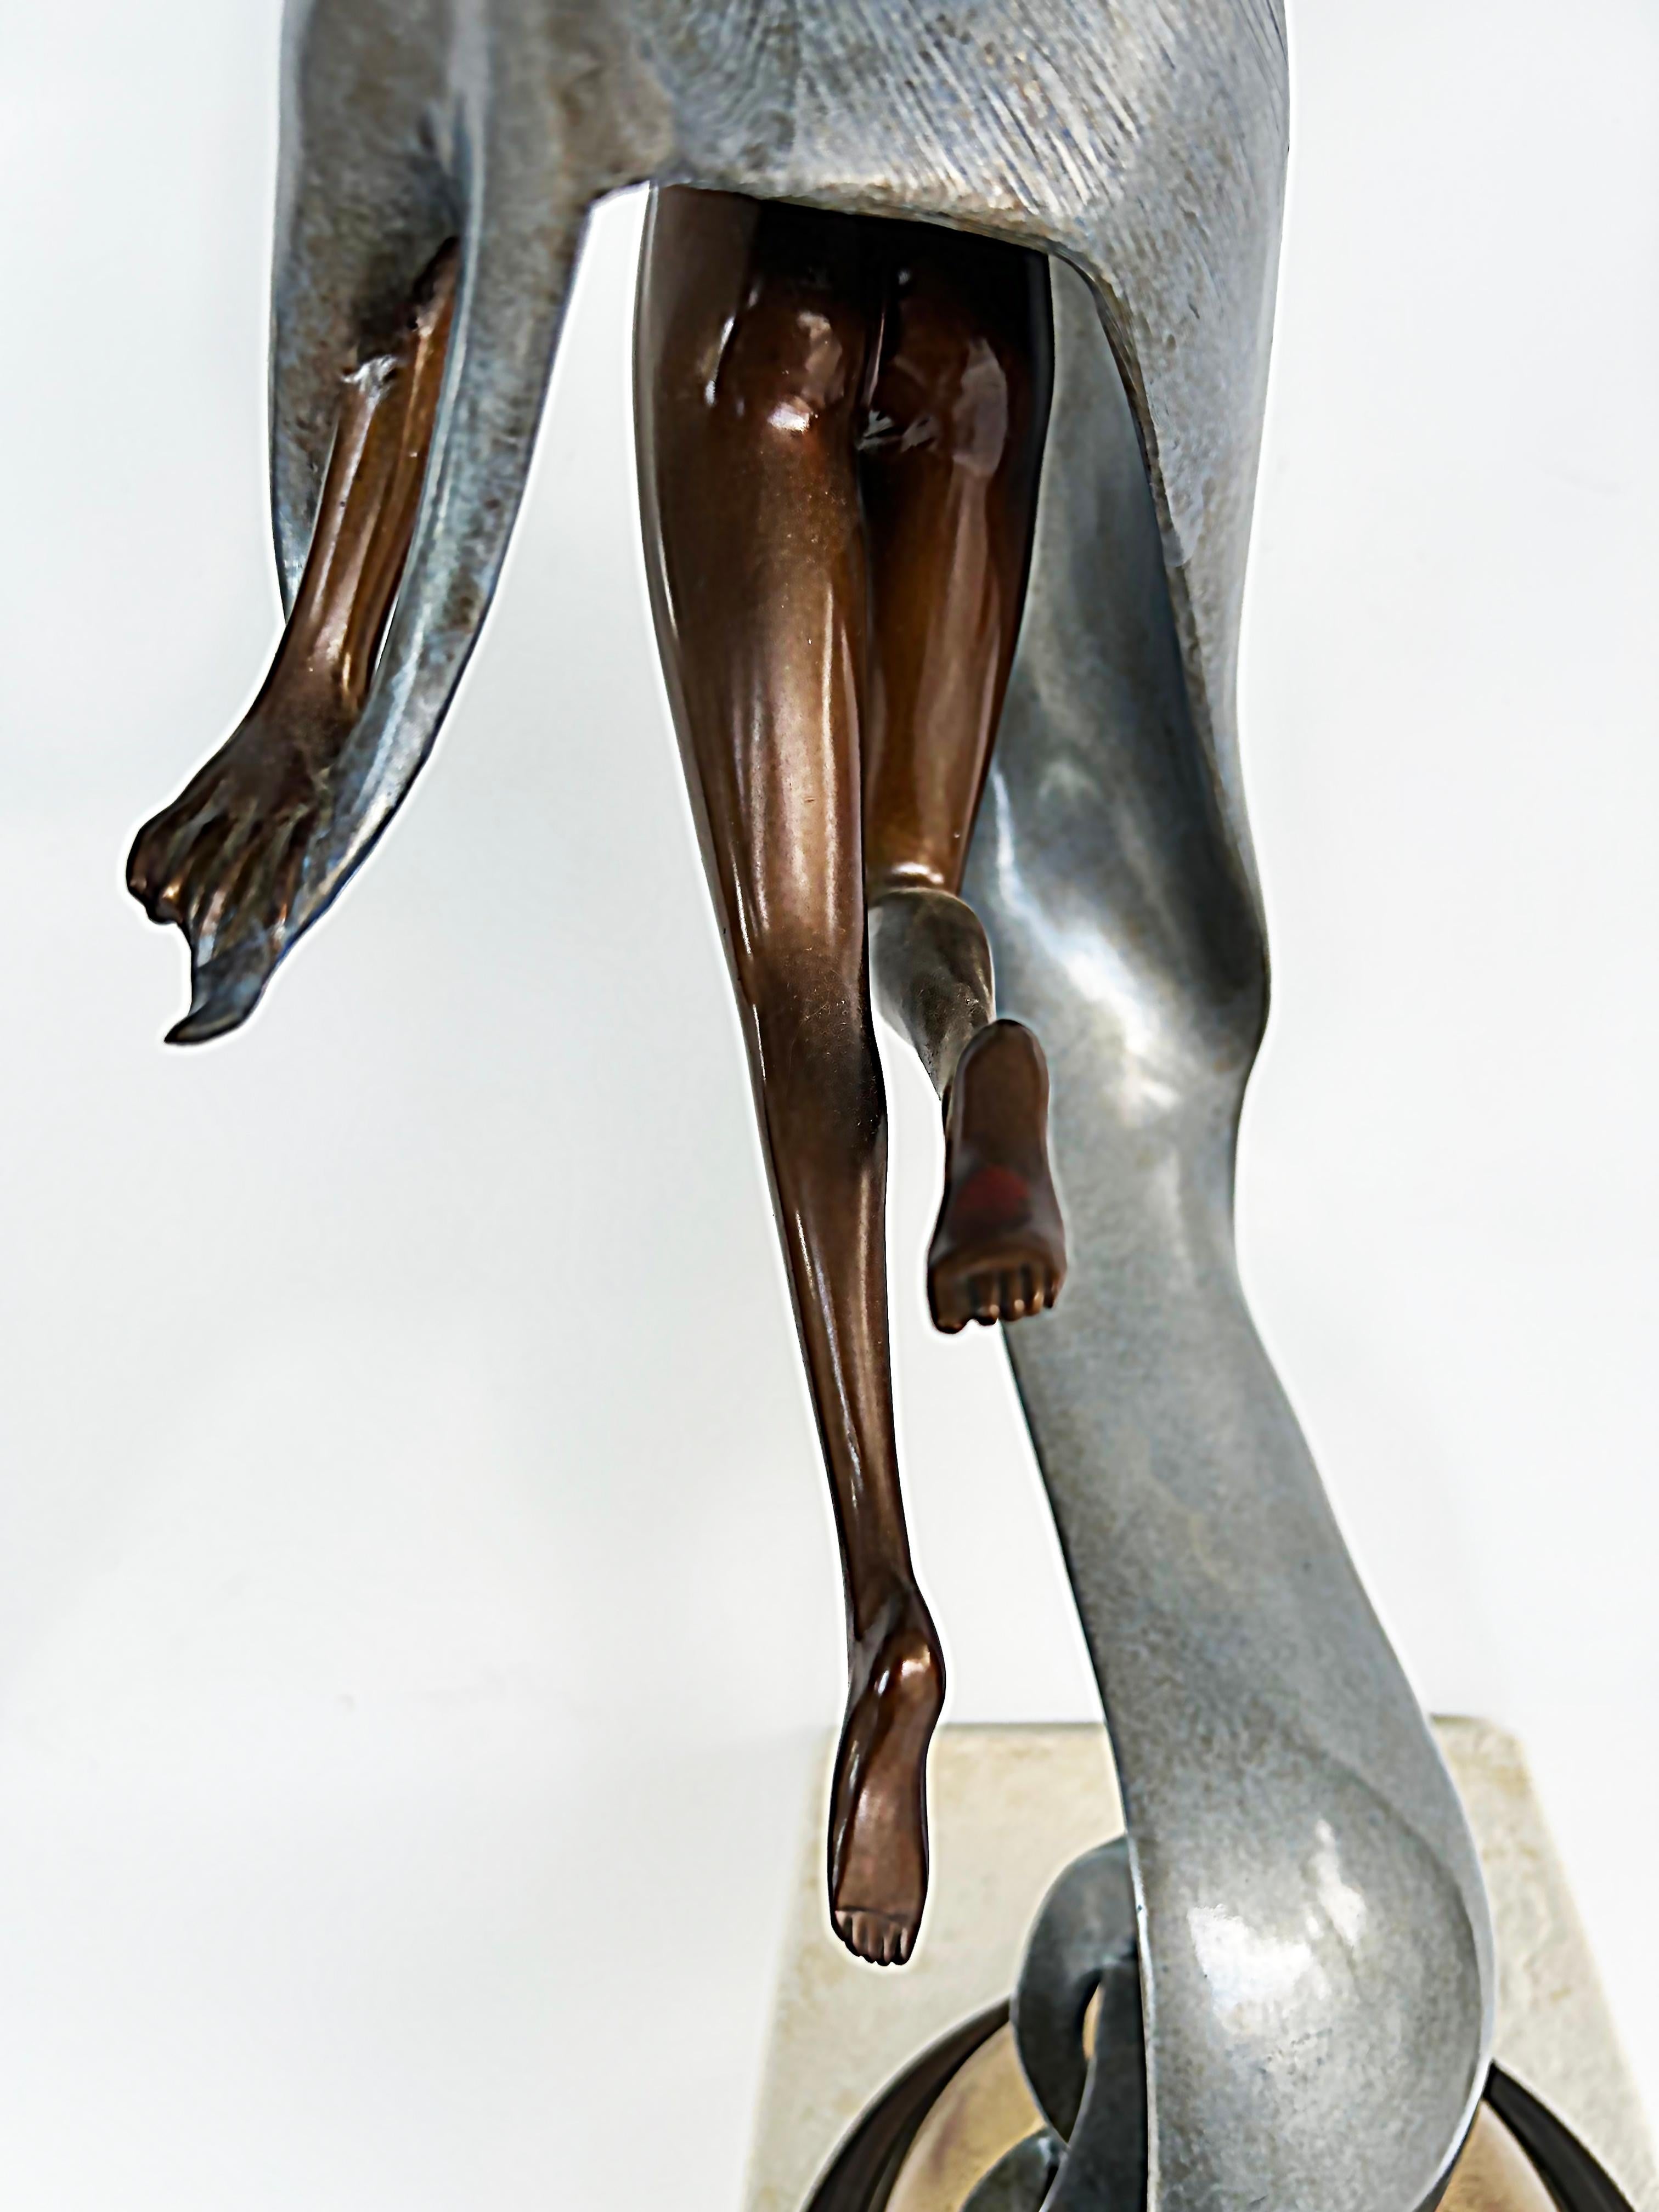 Silvered Angelo Basso Perla Bronze Sculpture Signed, Numbered 124/175